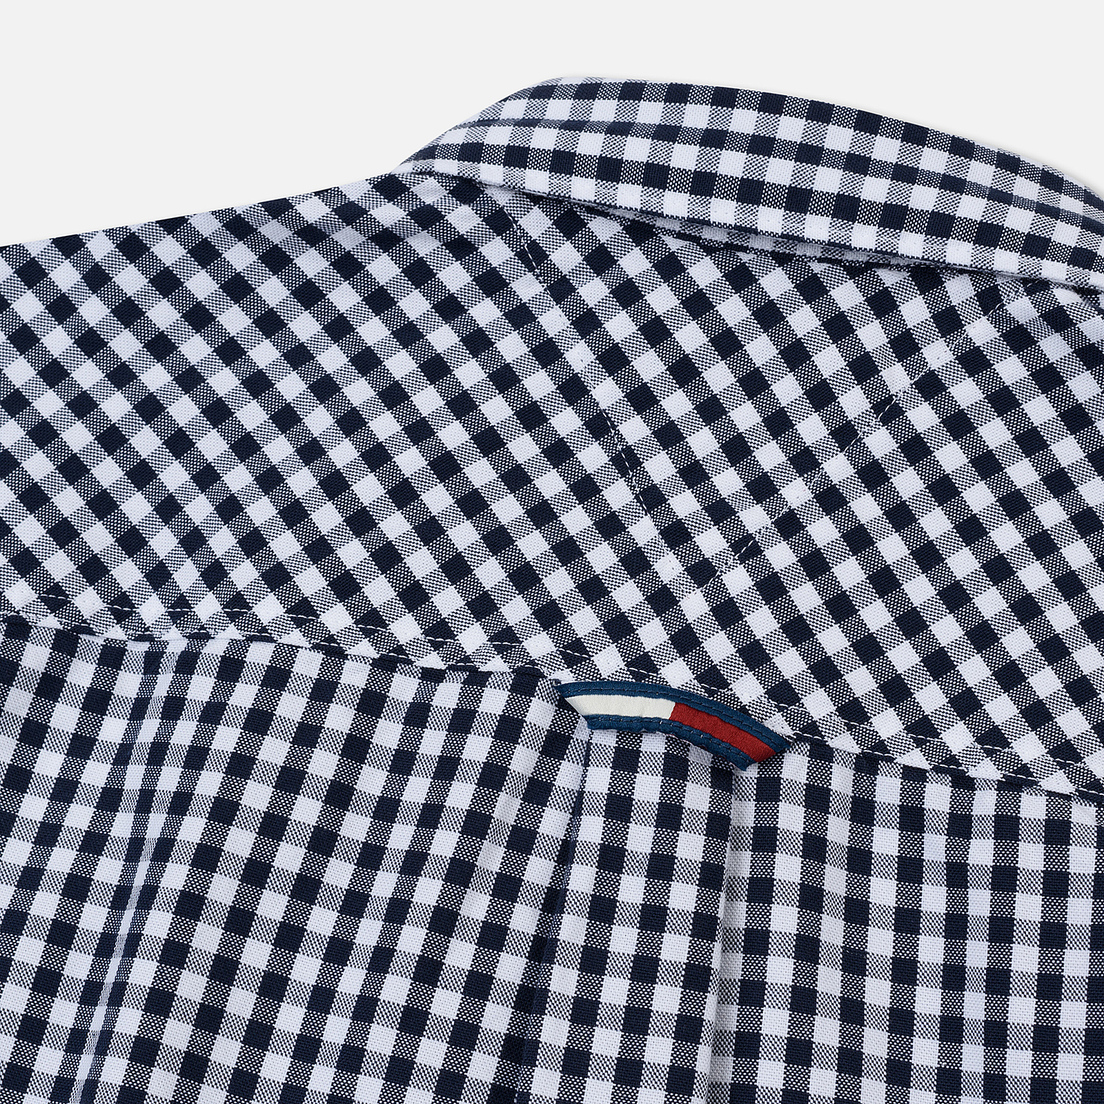 Tommy Jeans Мужская рубашка Essential Gingham